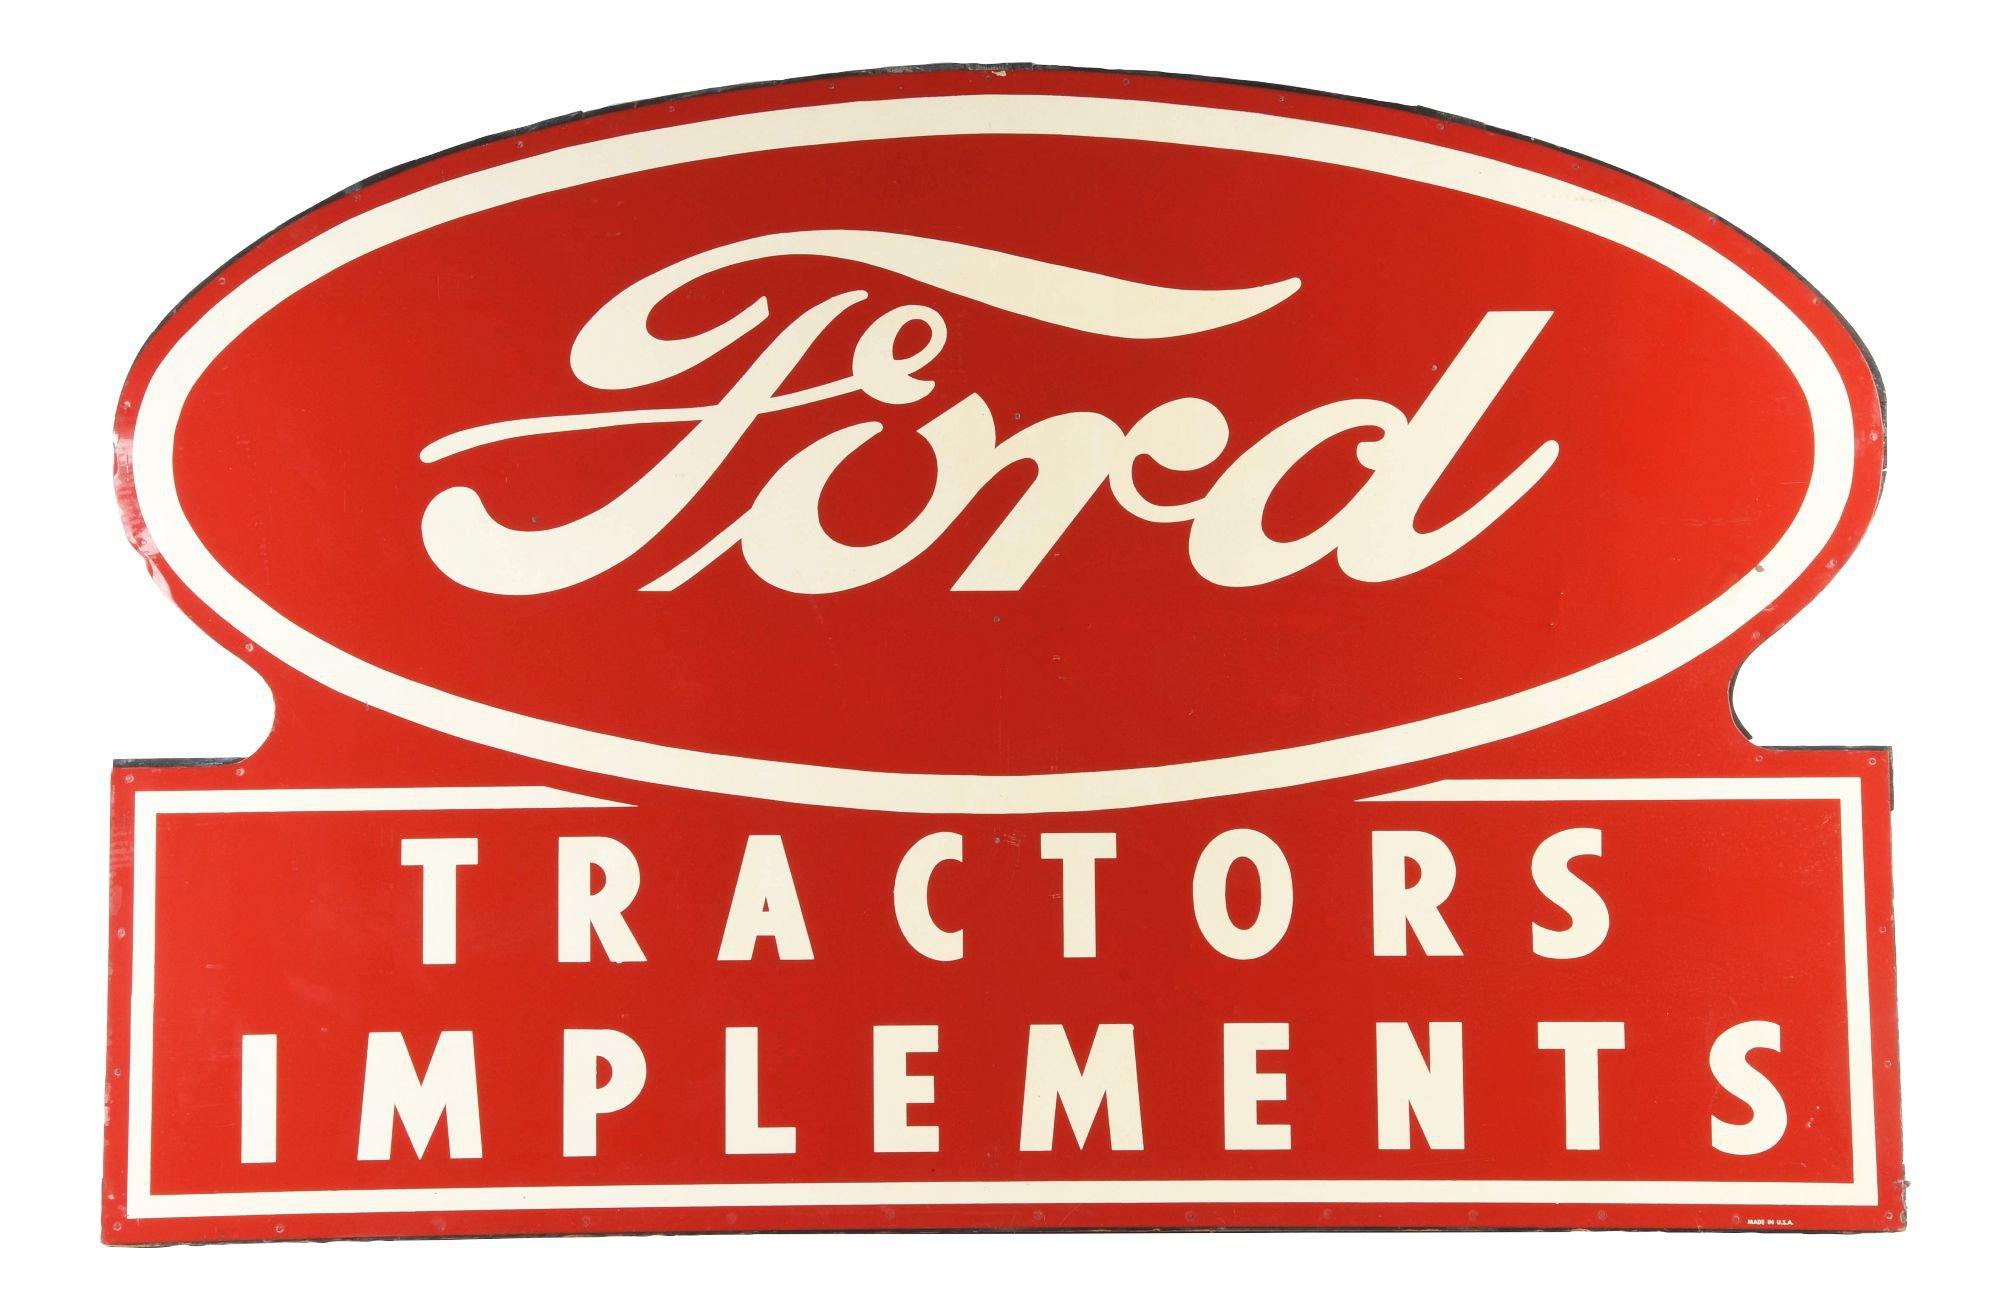 Ford Tractors & Implements New Old Stock Tin Sign w/ Original Wood Frame.